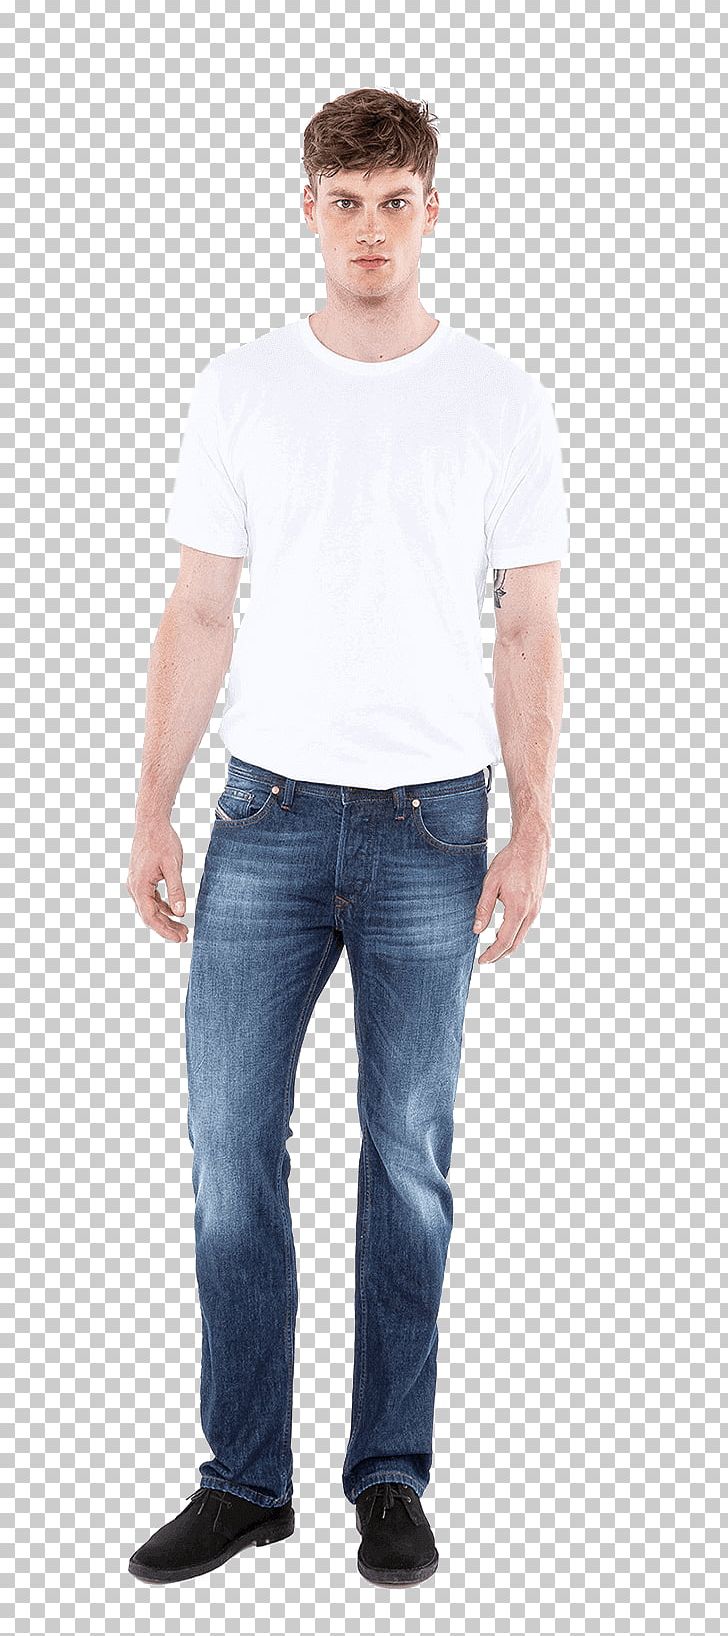 Jeans T-shirt Denim Sleeve PNG, Clipart, Abdomen, Blue, Casual, Casual Man, Denim Free PNG Download